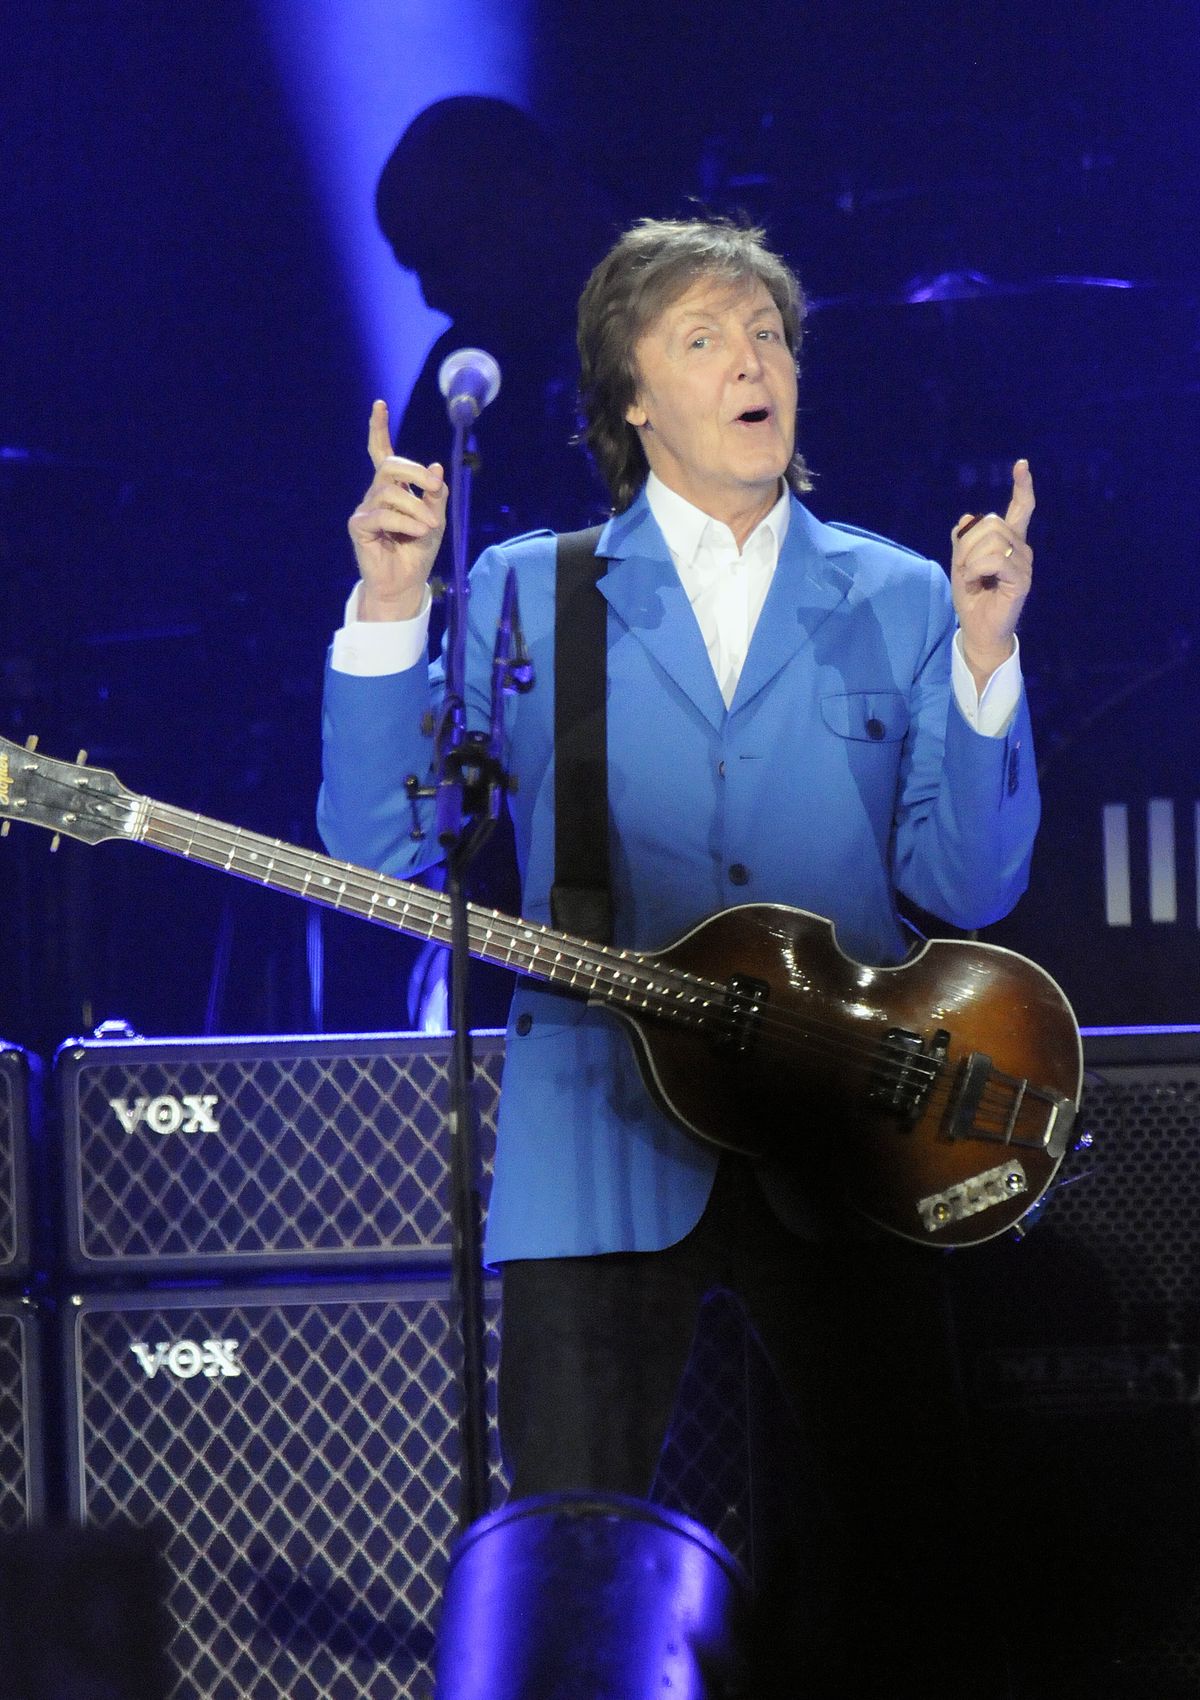 Sir Paul McCartney performs with his band. (Associated Press)